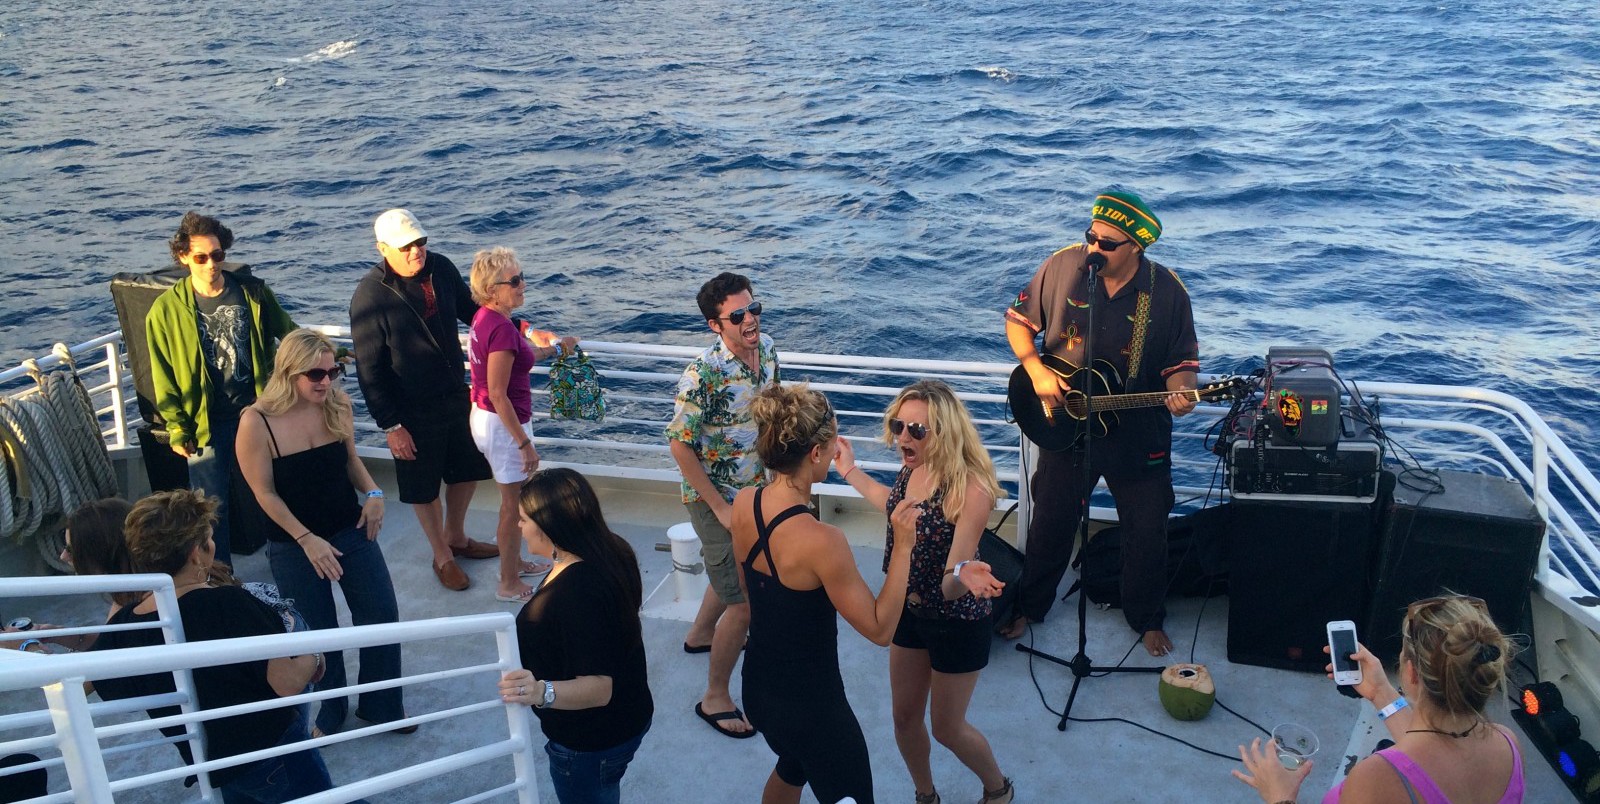 Island Rhythms sunset cruise from the Pacific Whale Foundation.